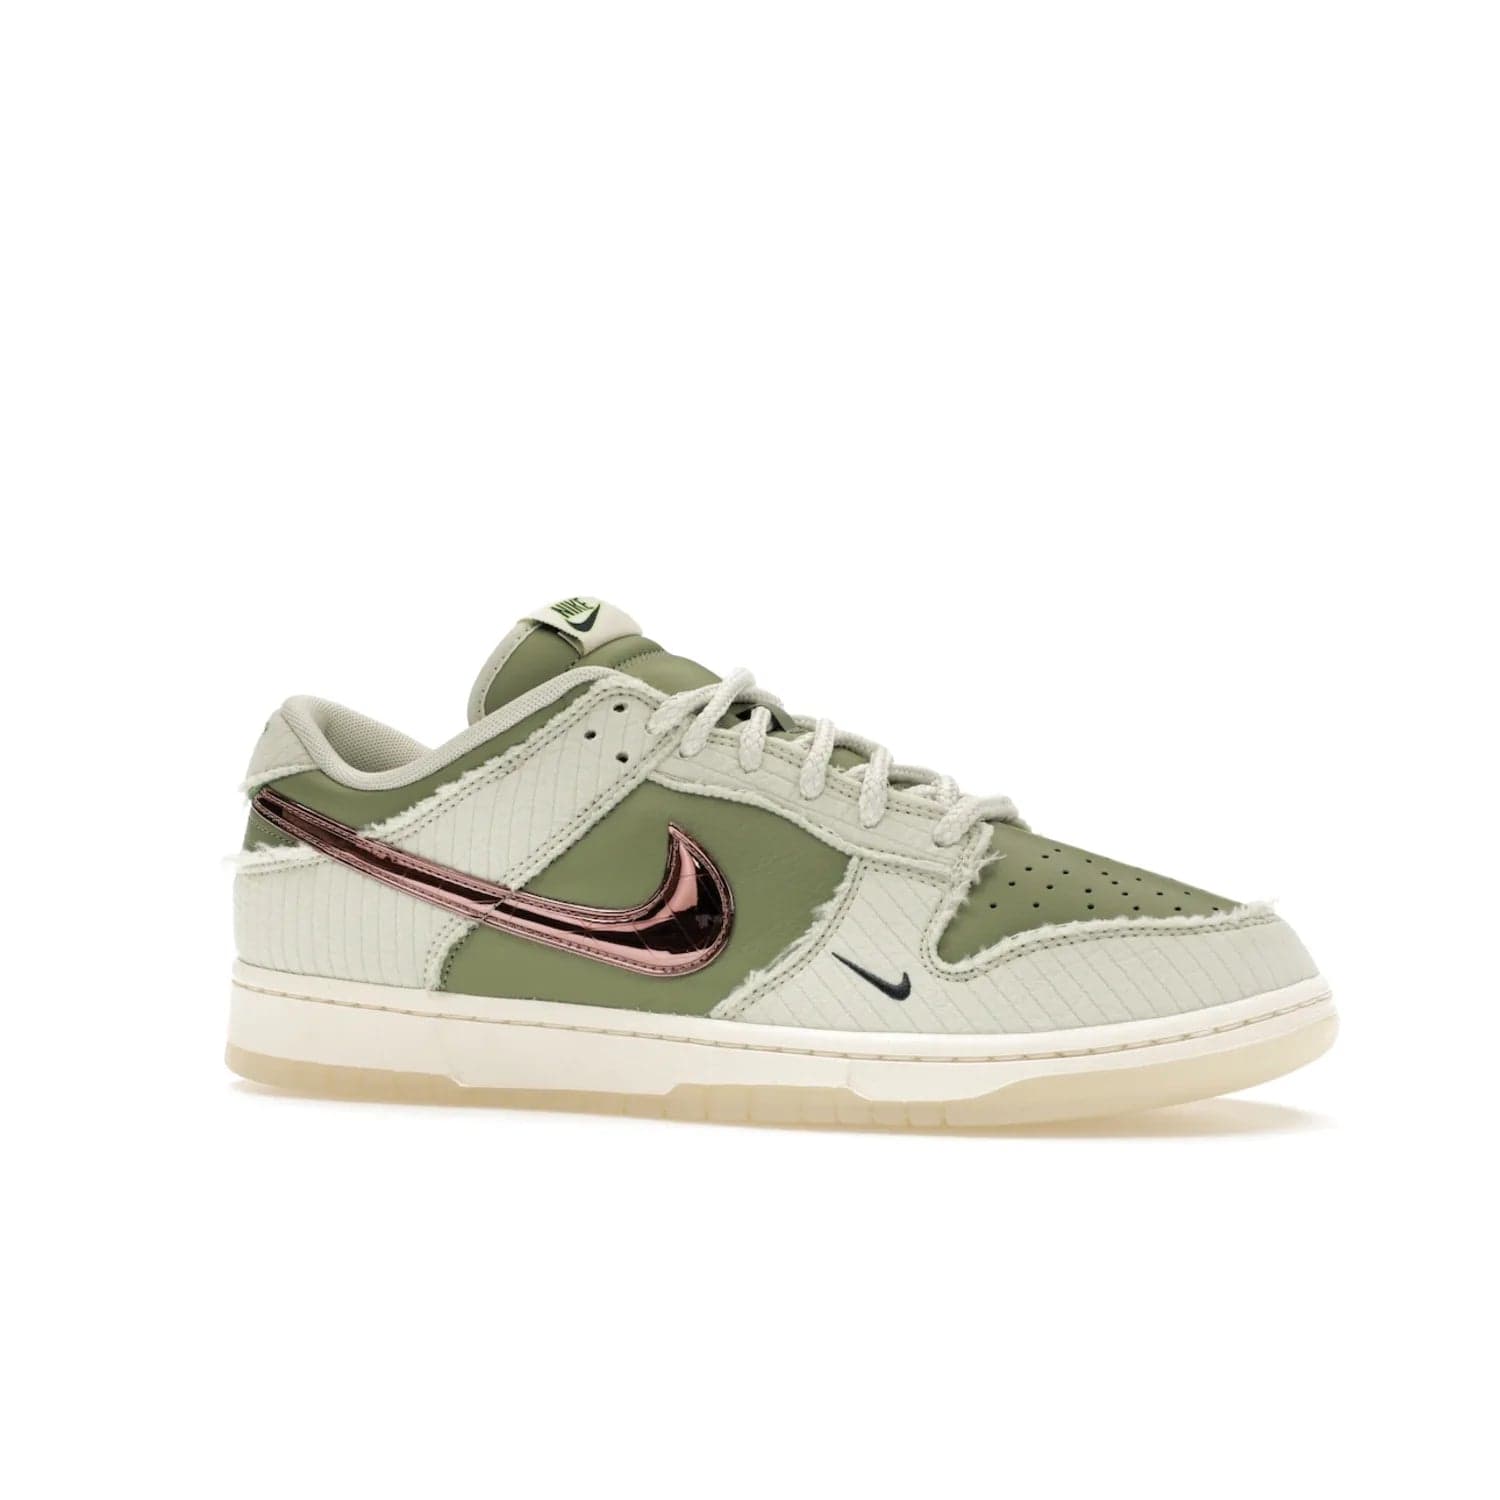 Nike Dunk Low Retro PRM Kyler Murray Be 1 of One - Image 3 - Only at www.BallersClubKickz.com - Introducing the Nike Dunk Low Retro PRM Kyler Murray "Be 1 of One"! A Sea Glass upper with Sail and Oil Green accents, finished with Rose Gold accents. Drop date: November 10th.